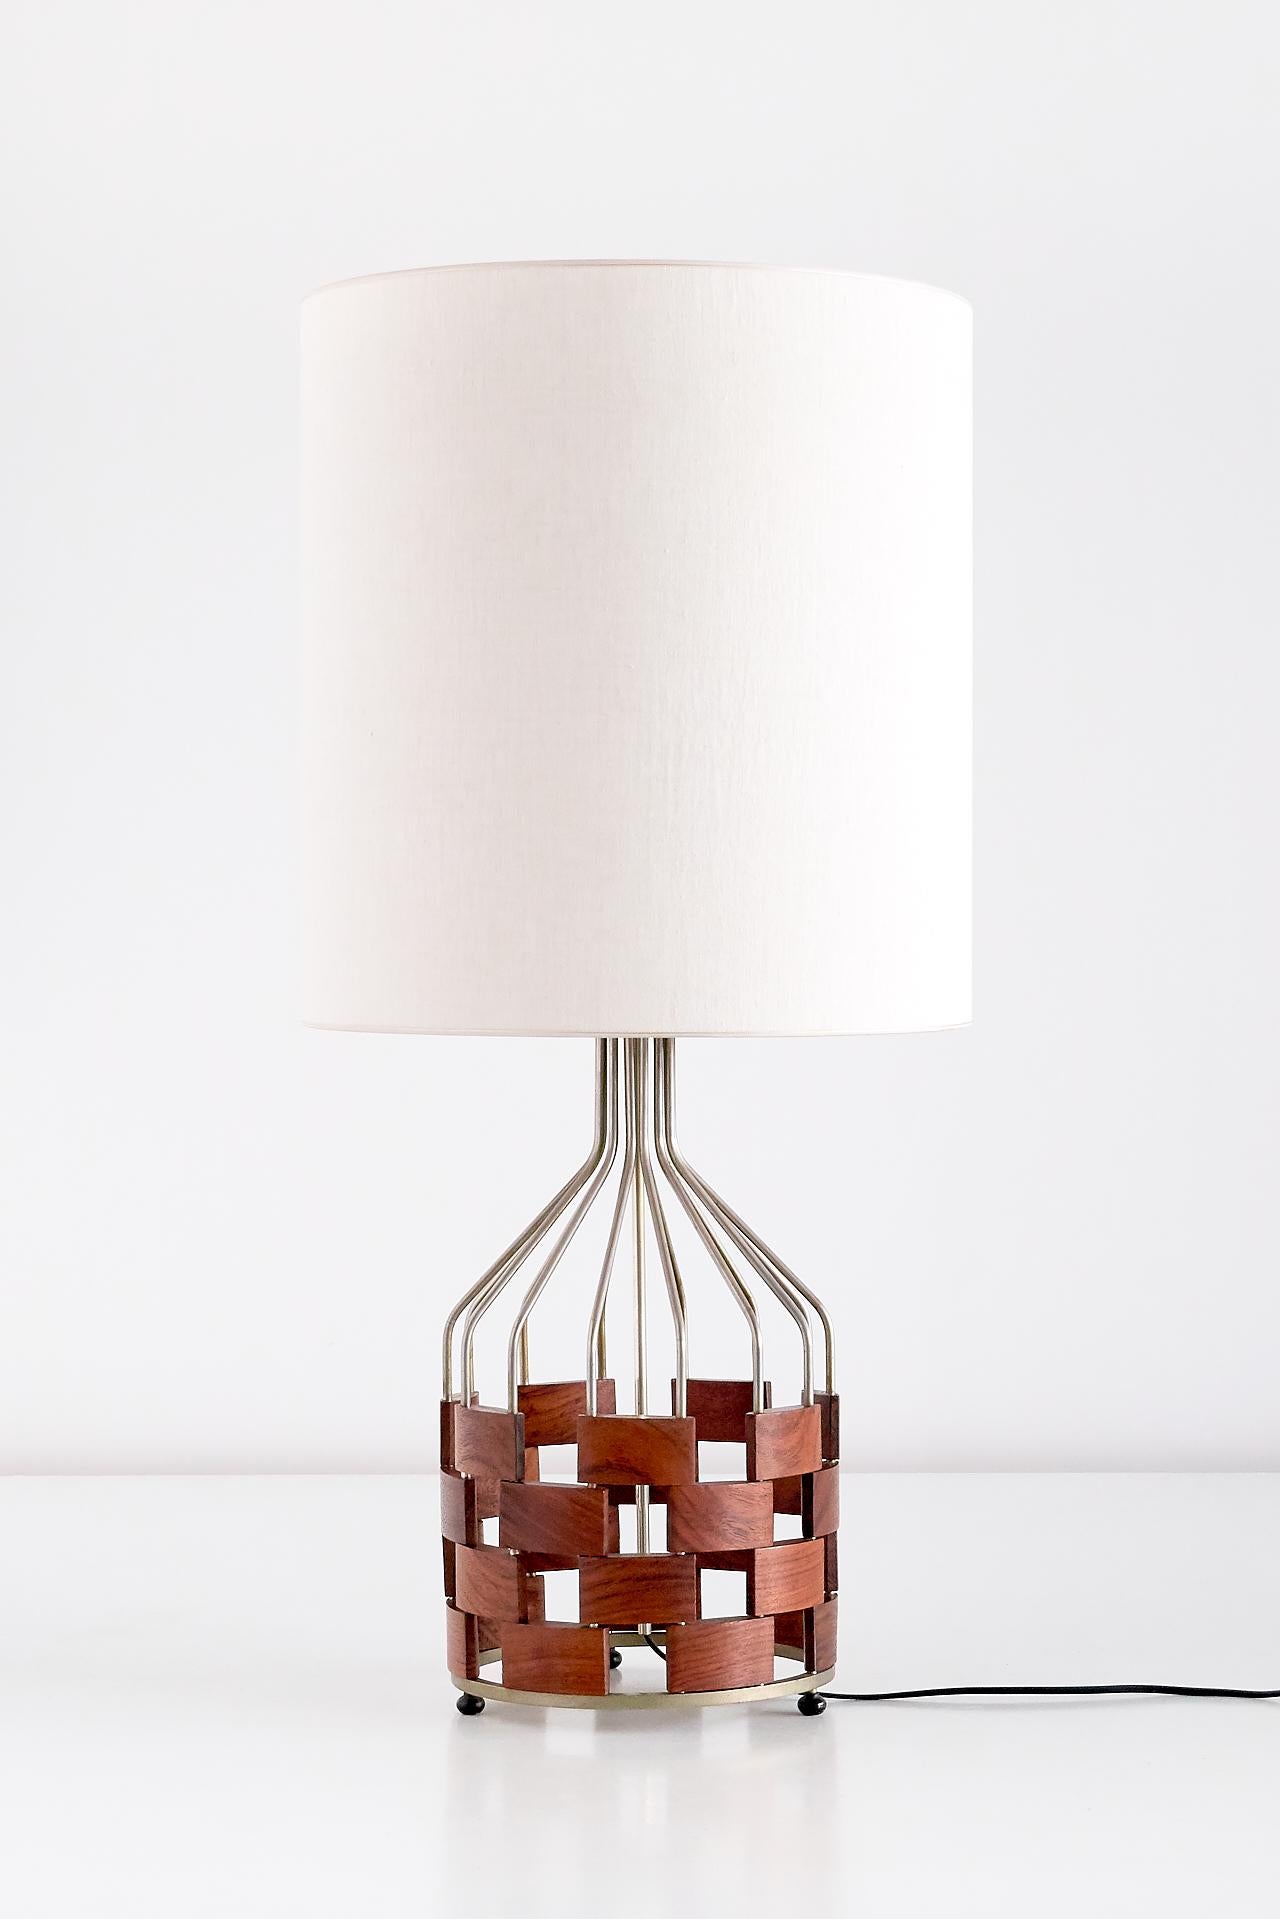 Plated Large Maurizio Tempestini Table Lamp for Casey Fantin, Florence, 1961 For Sale